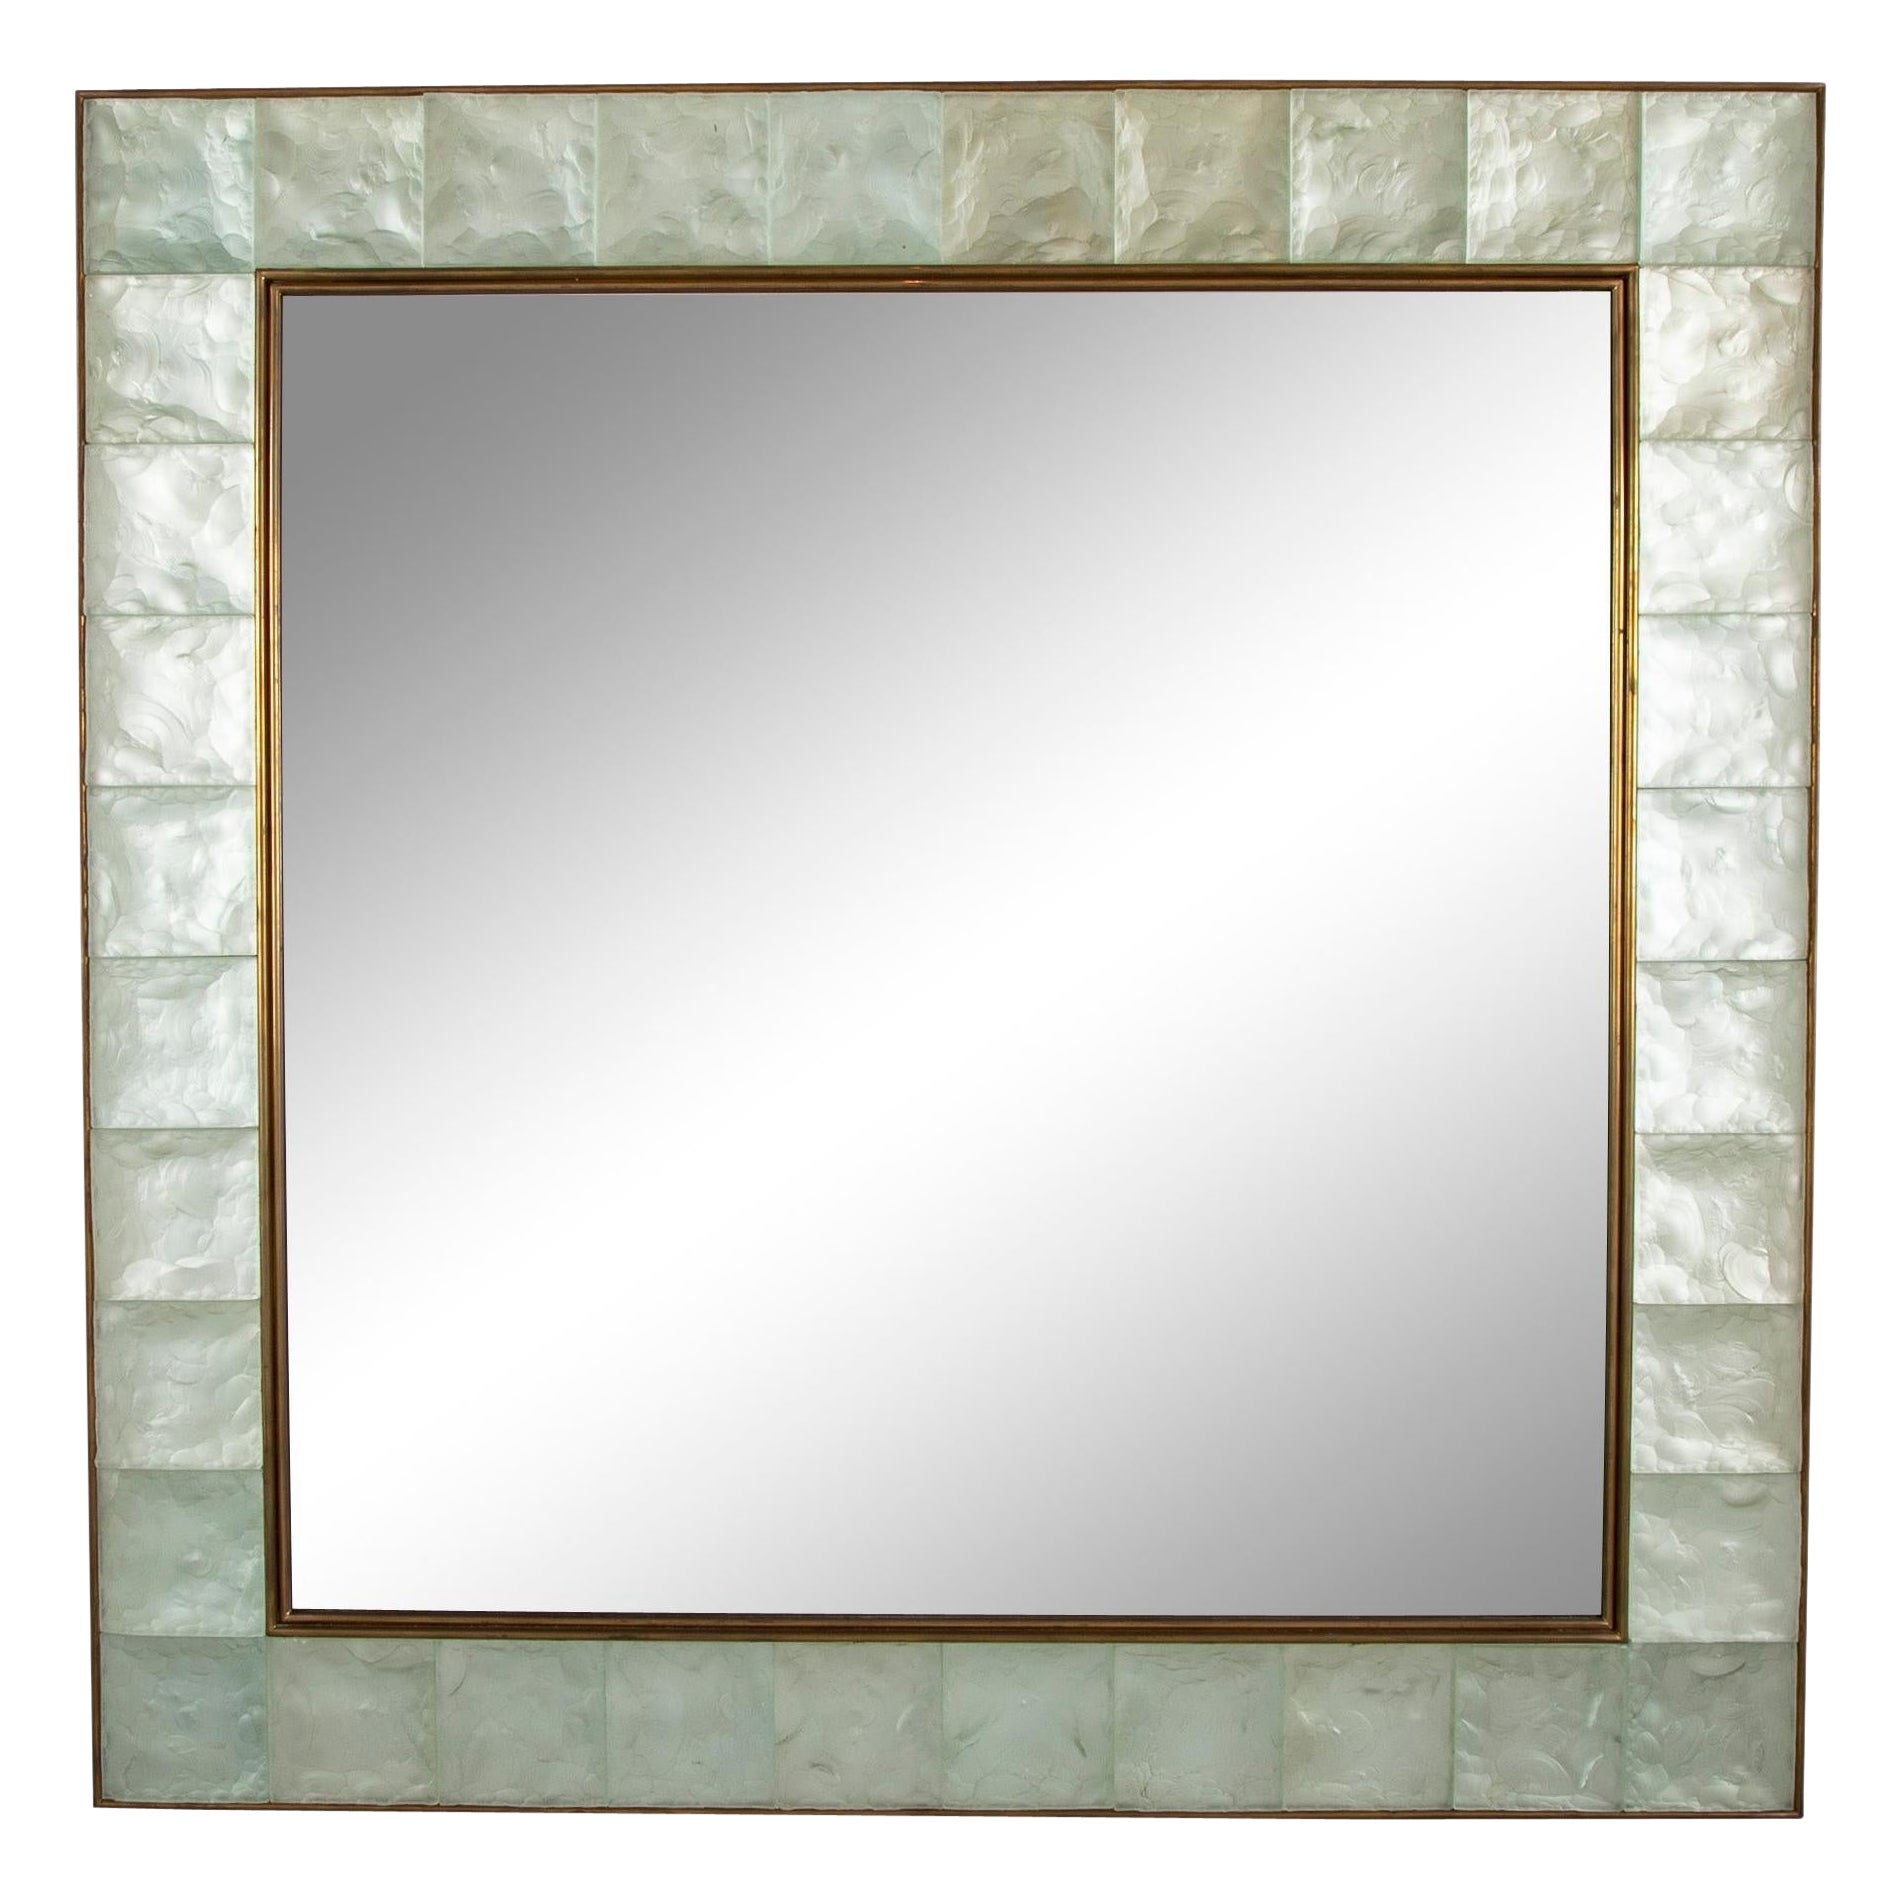 "Pastis" A Brass and Glass Square Framed Mirror by Michele Ghiro